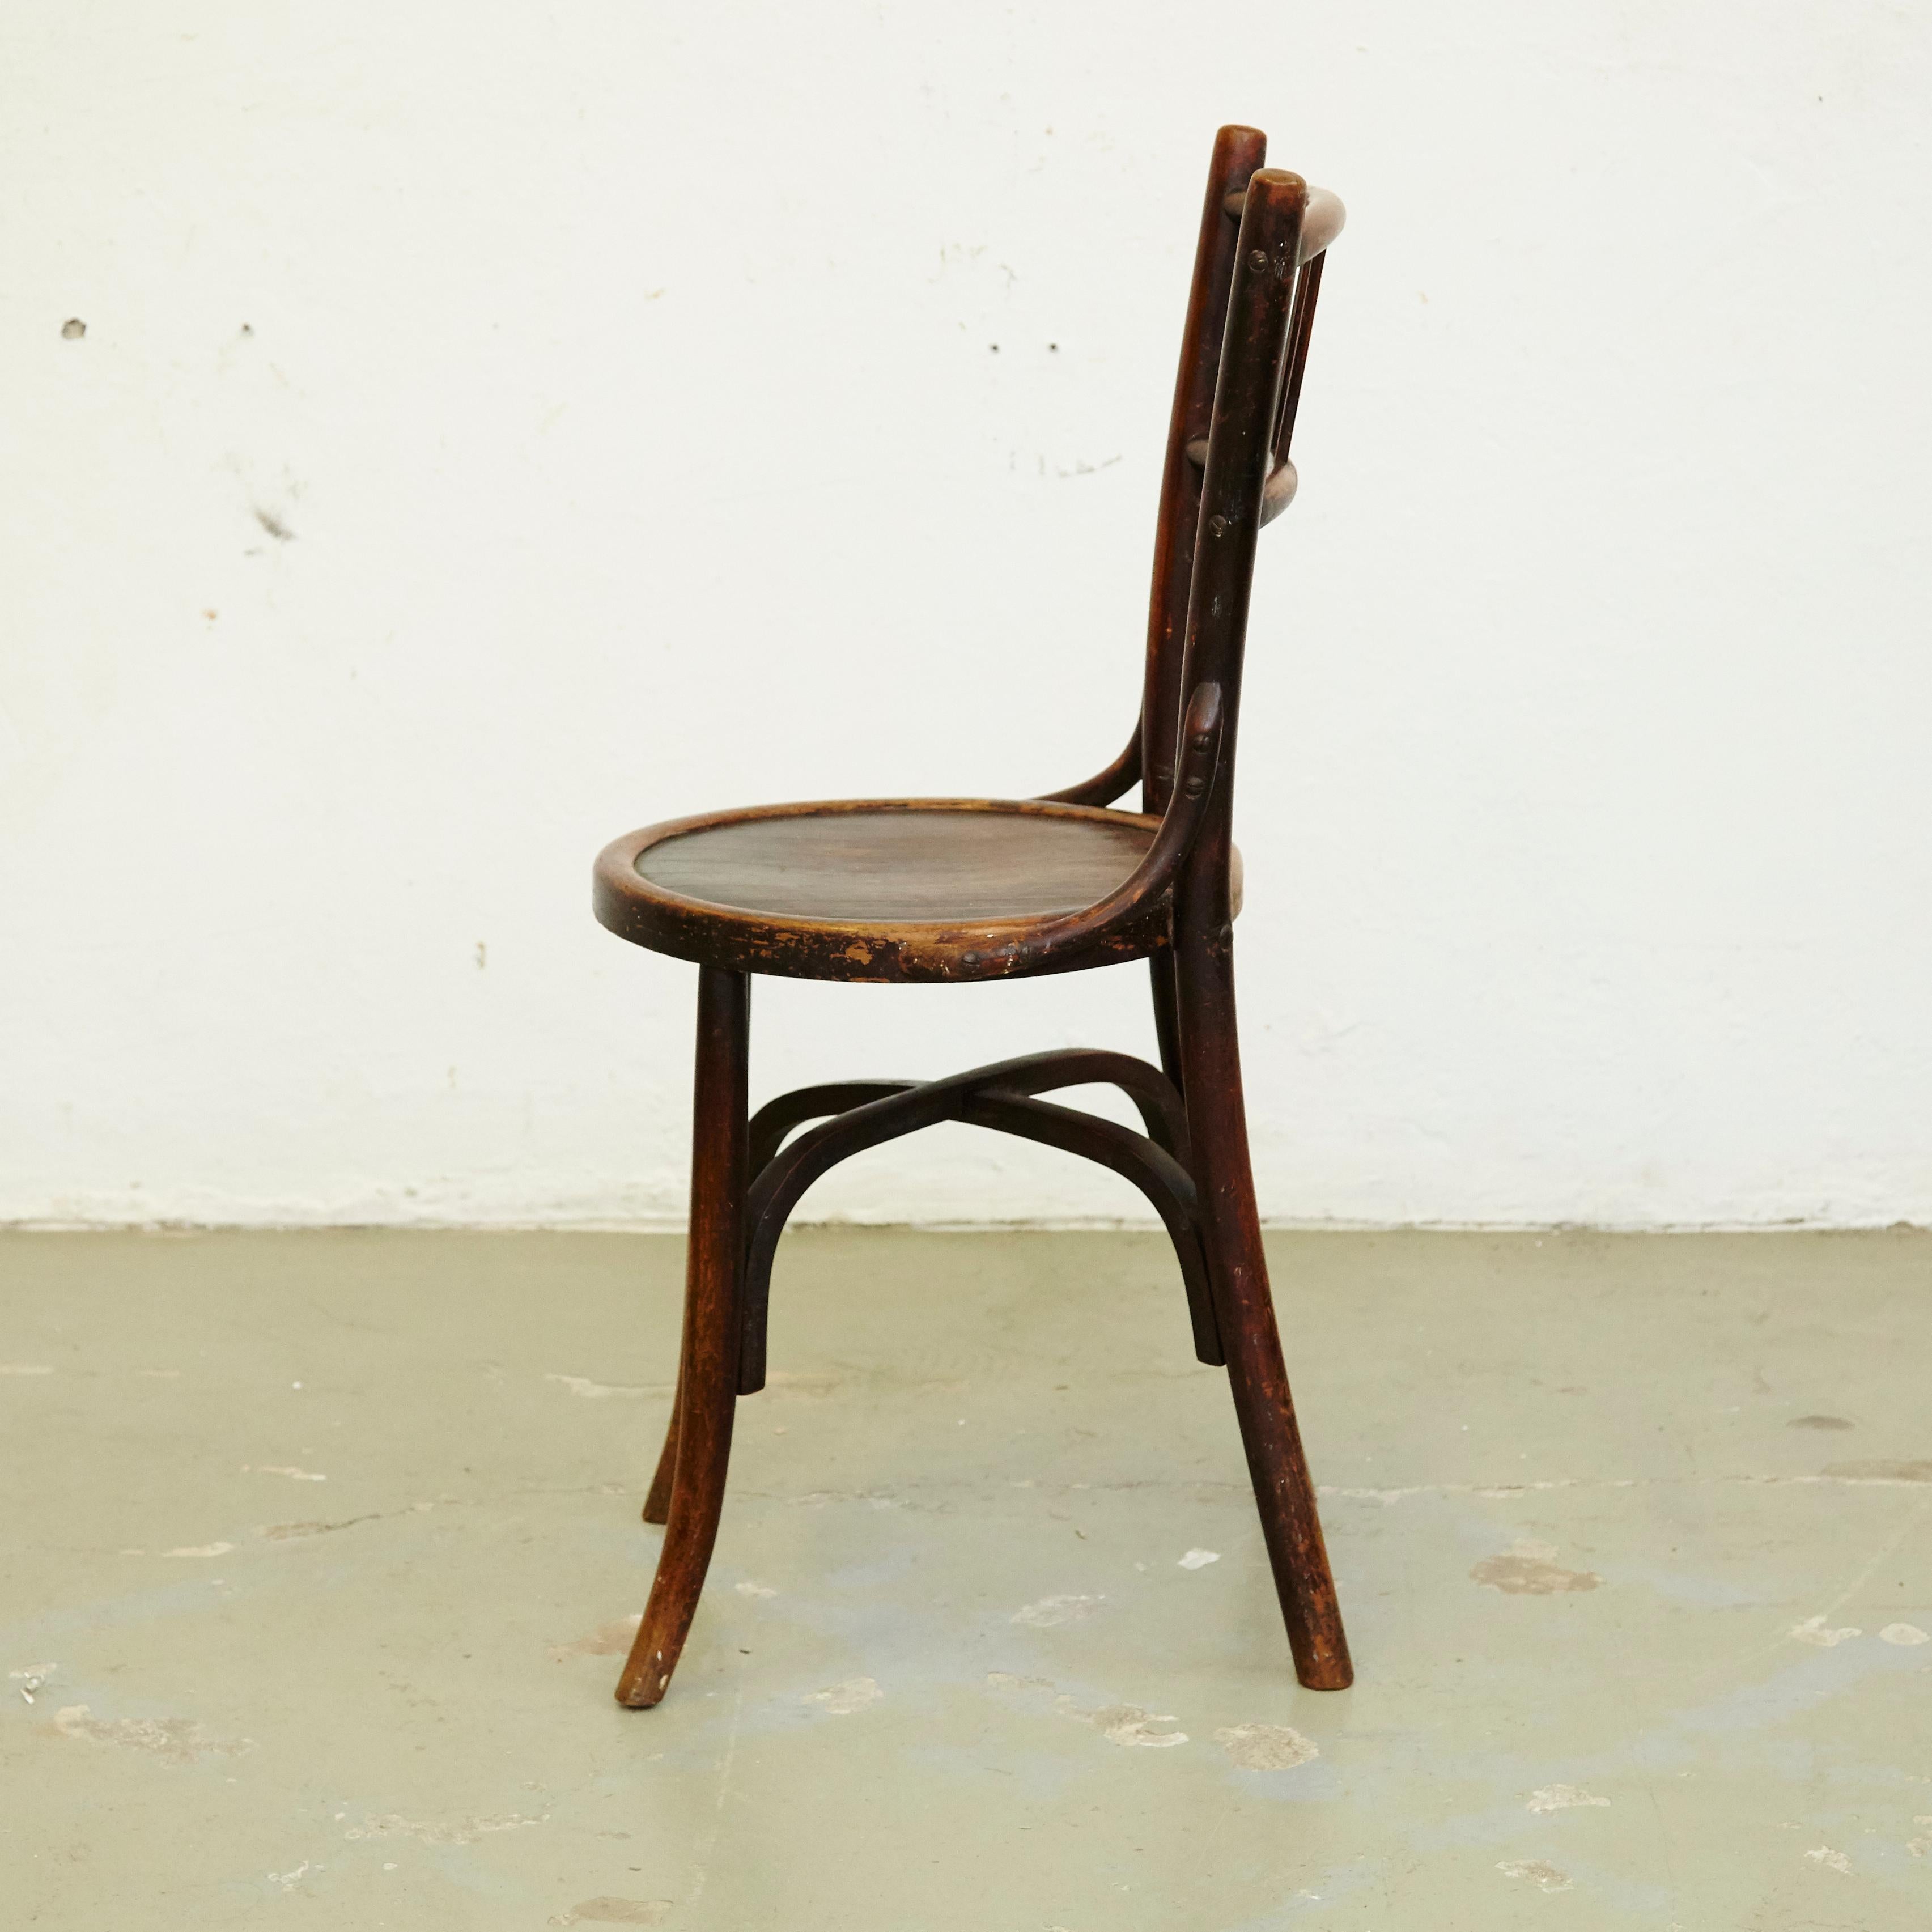 German After Thonet Wood Chair